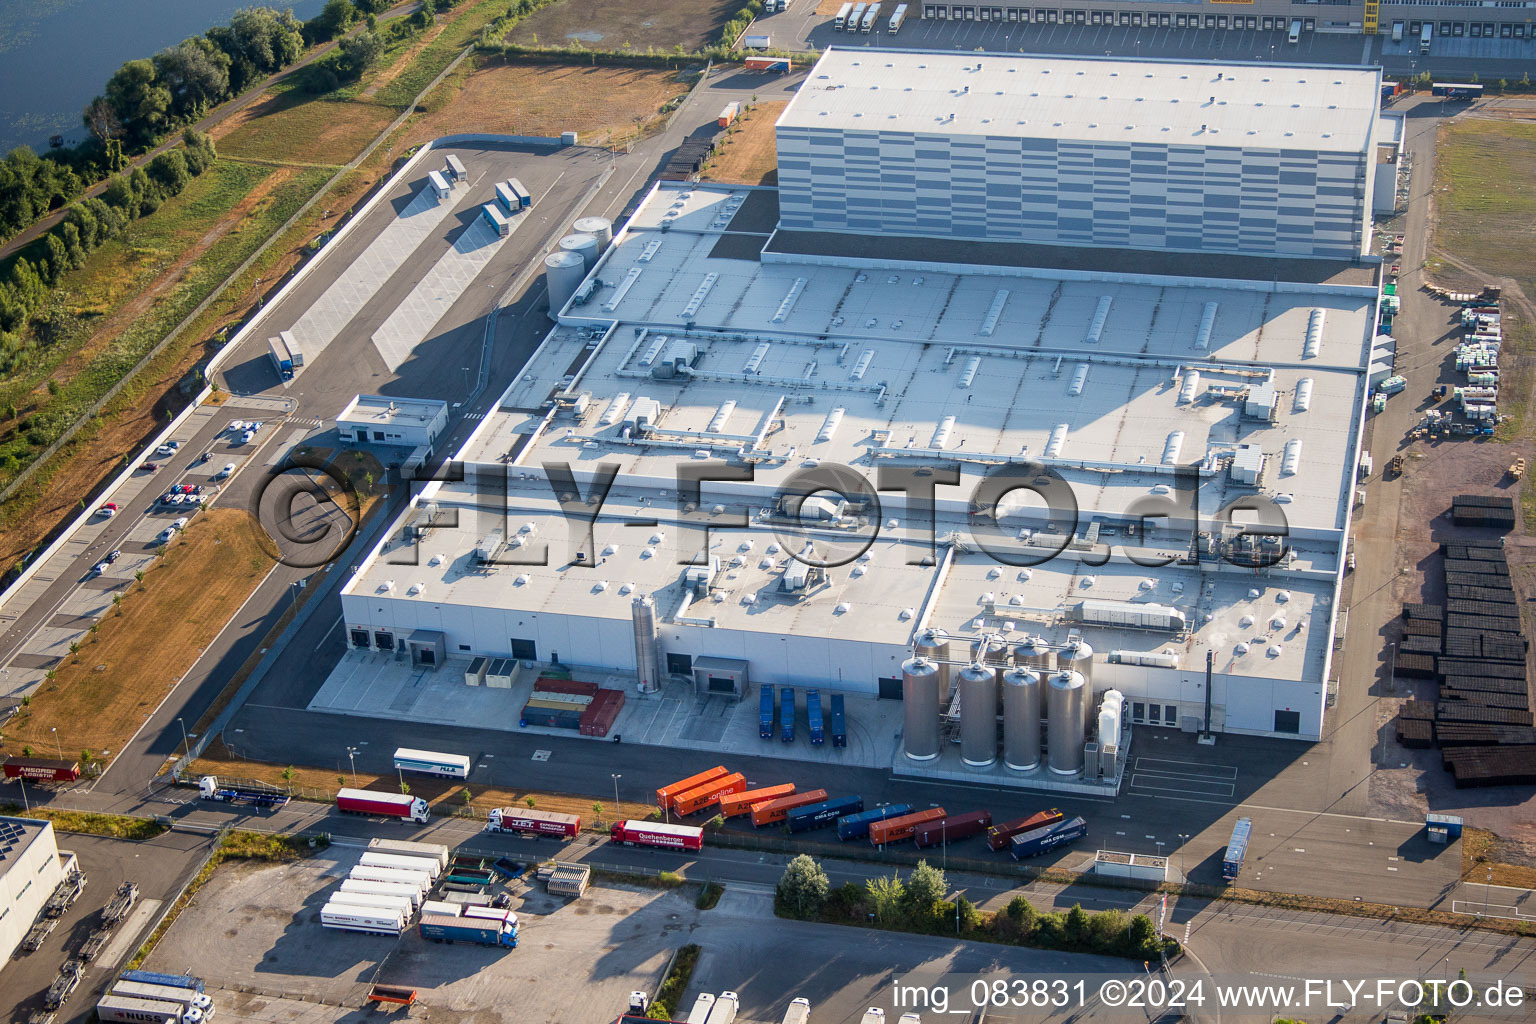 Aerial view of Building and production halls on the premises of Pfaelzer Erfrischungsgetraenke GmbH in Woerth am Rhein in the state Rhineland-Palatinate, Germany